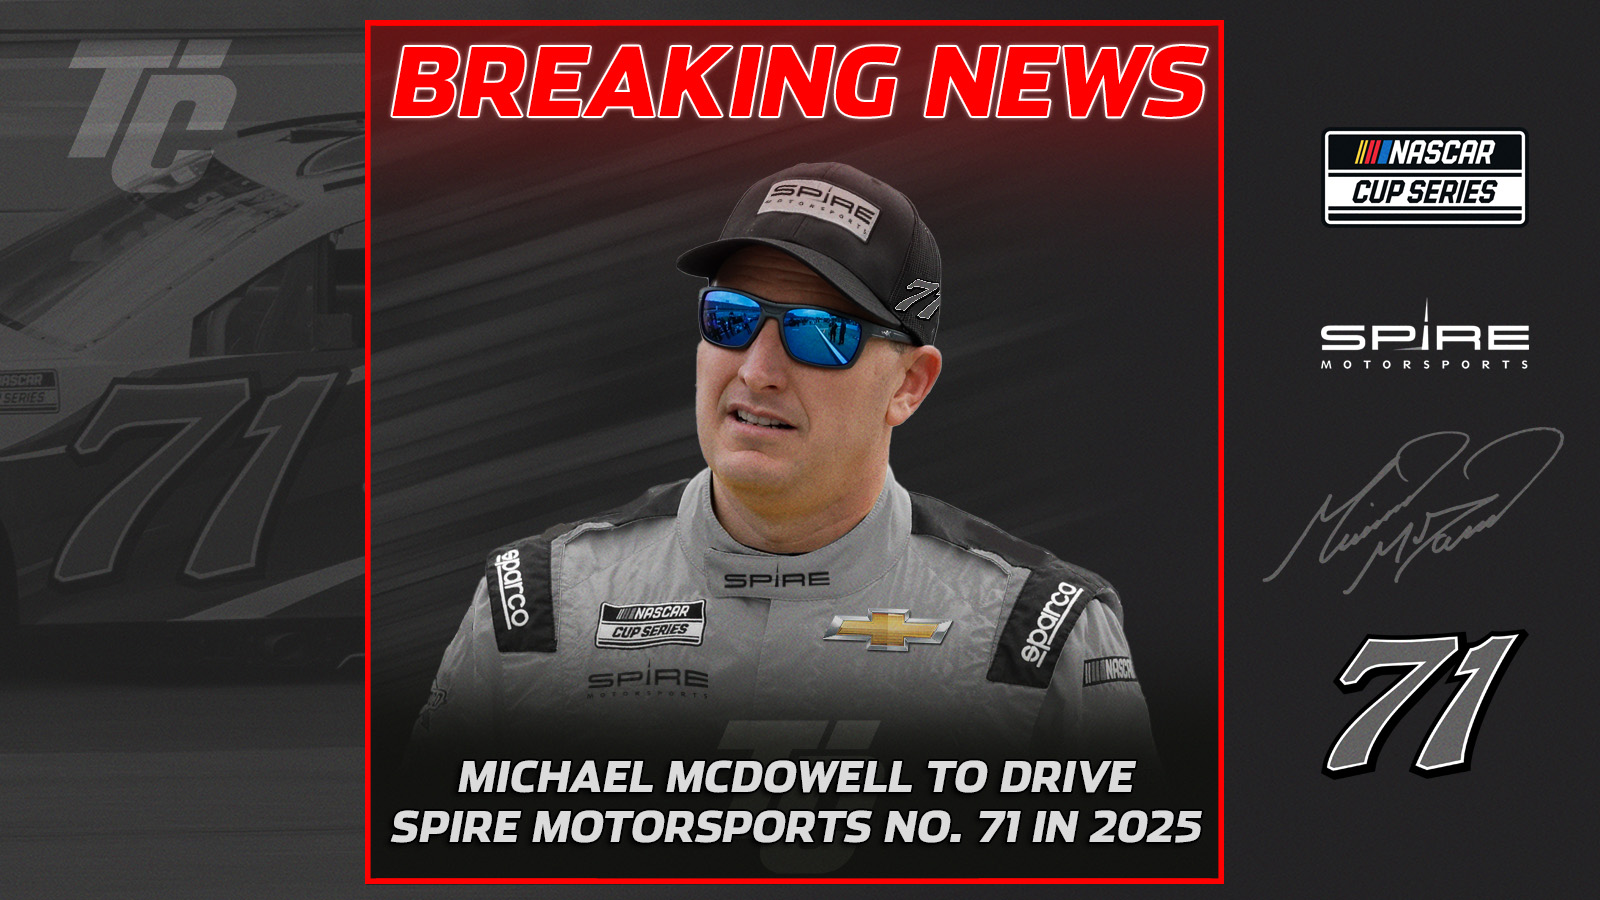 Michael McDowell Spire Motorsports 2025 NASCAR Cup Series 71 car multiyear contract